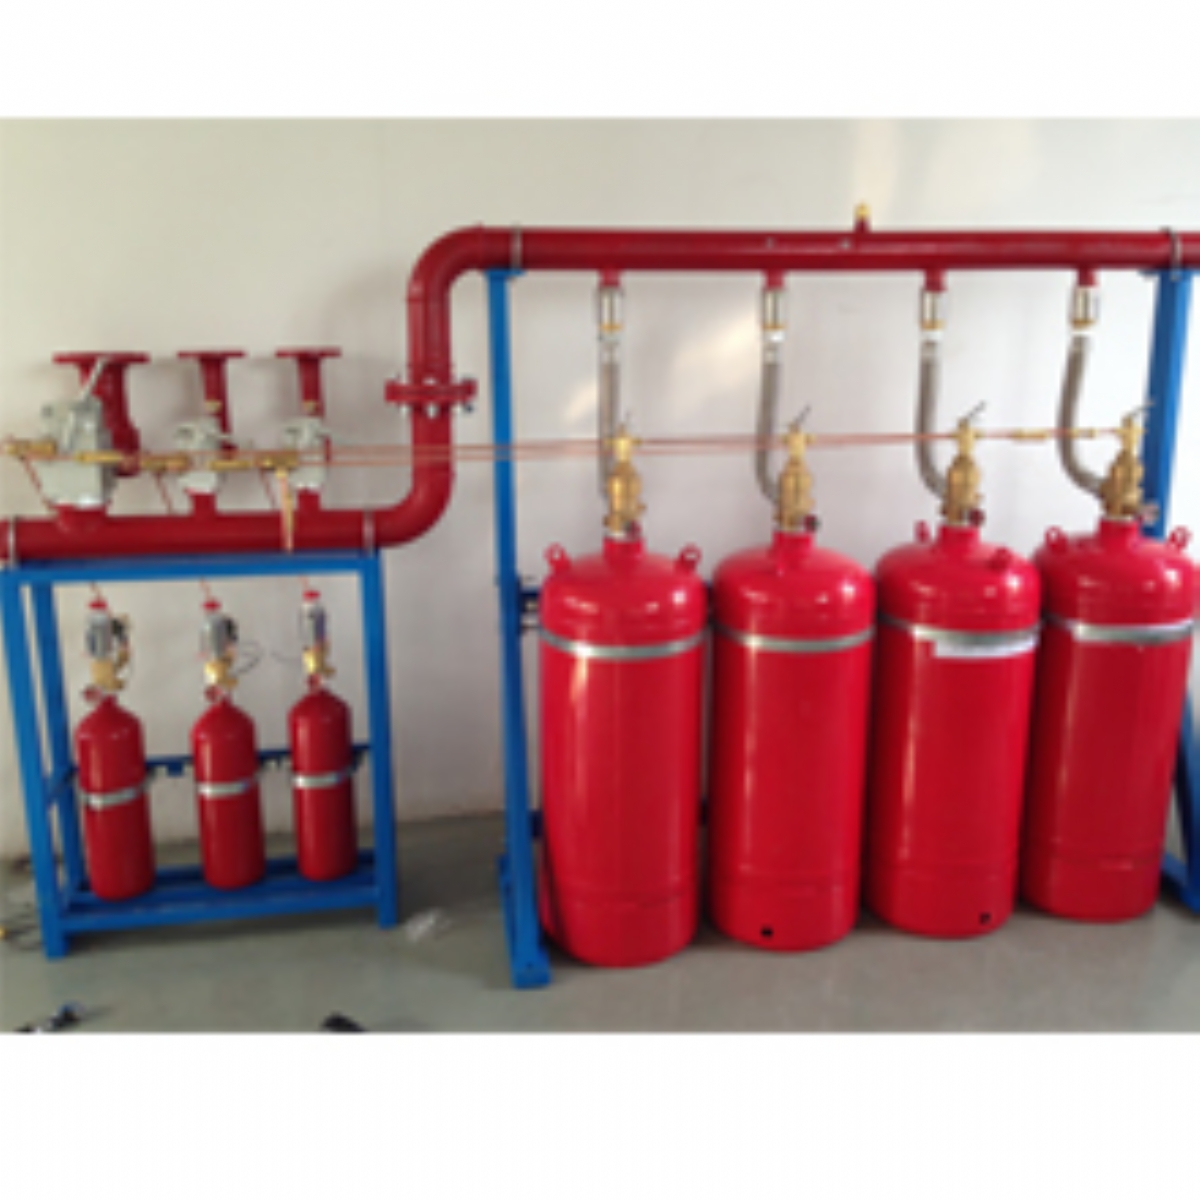  Automatic Fire Suppression Systems